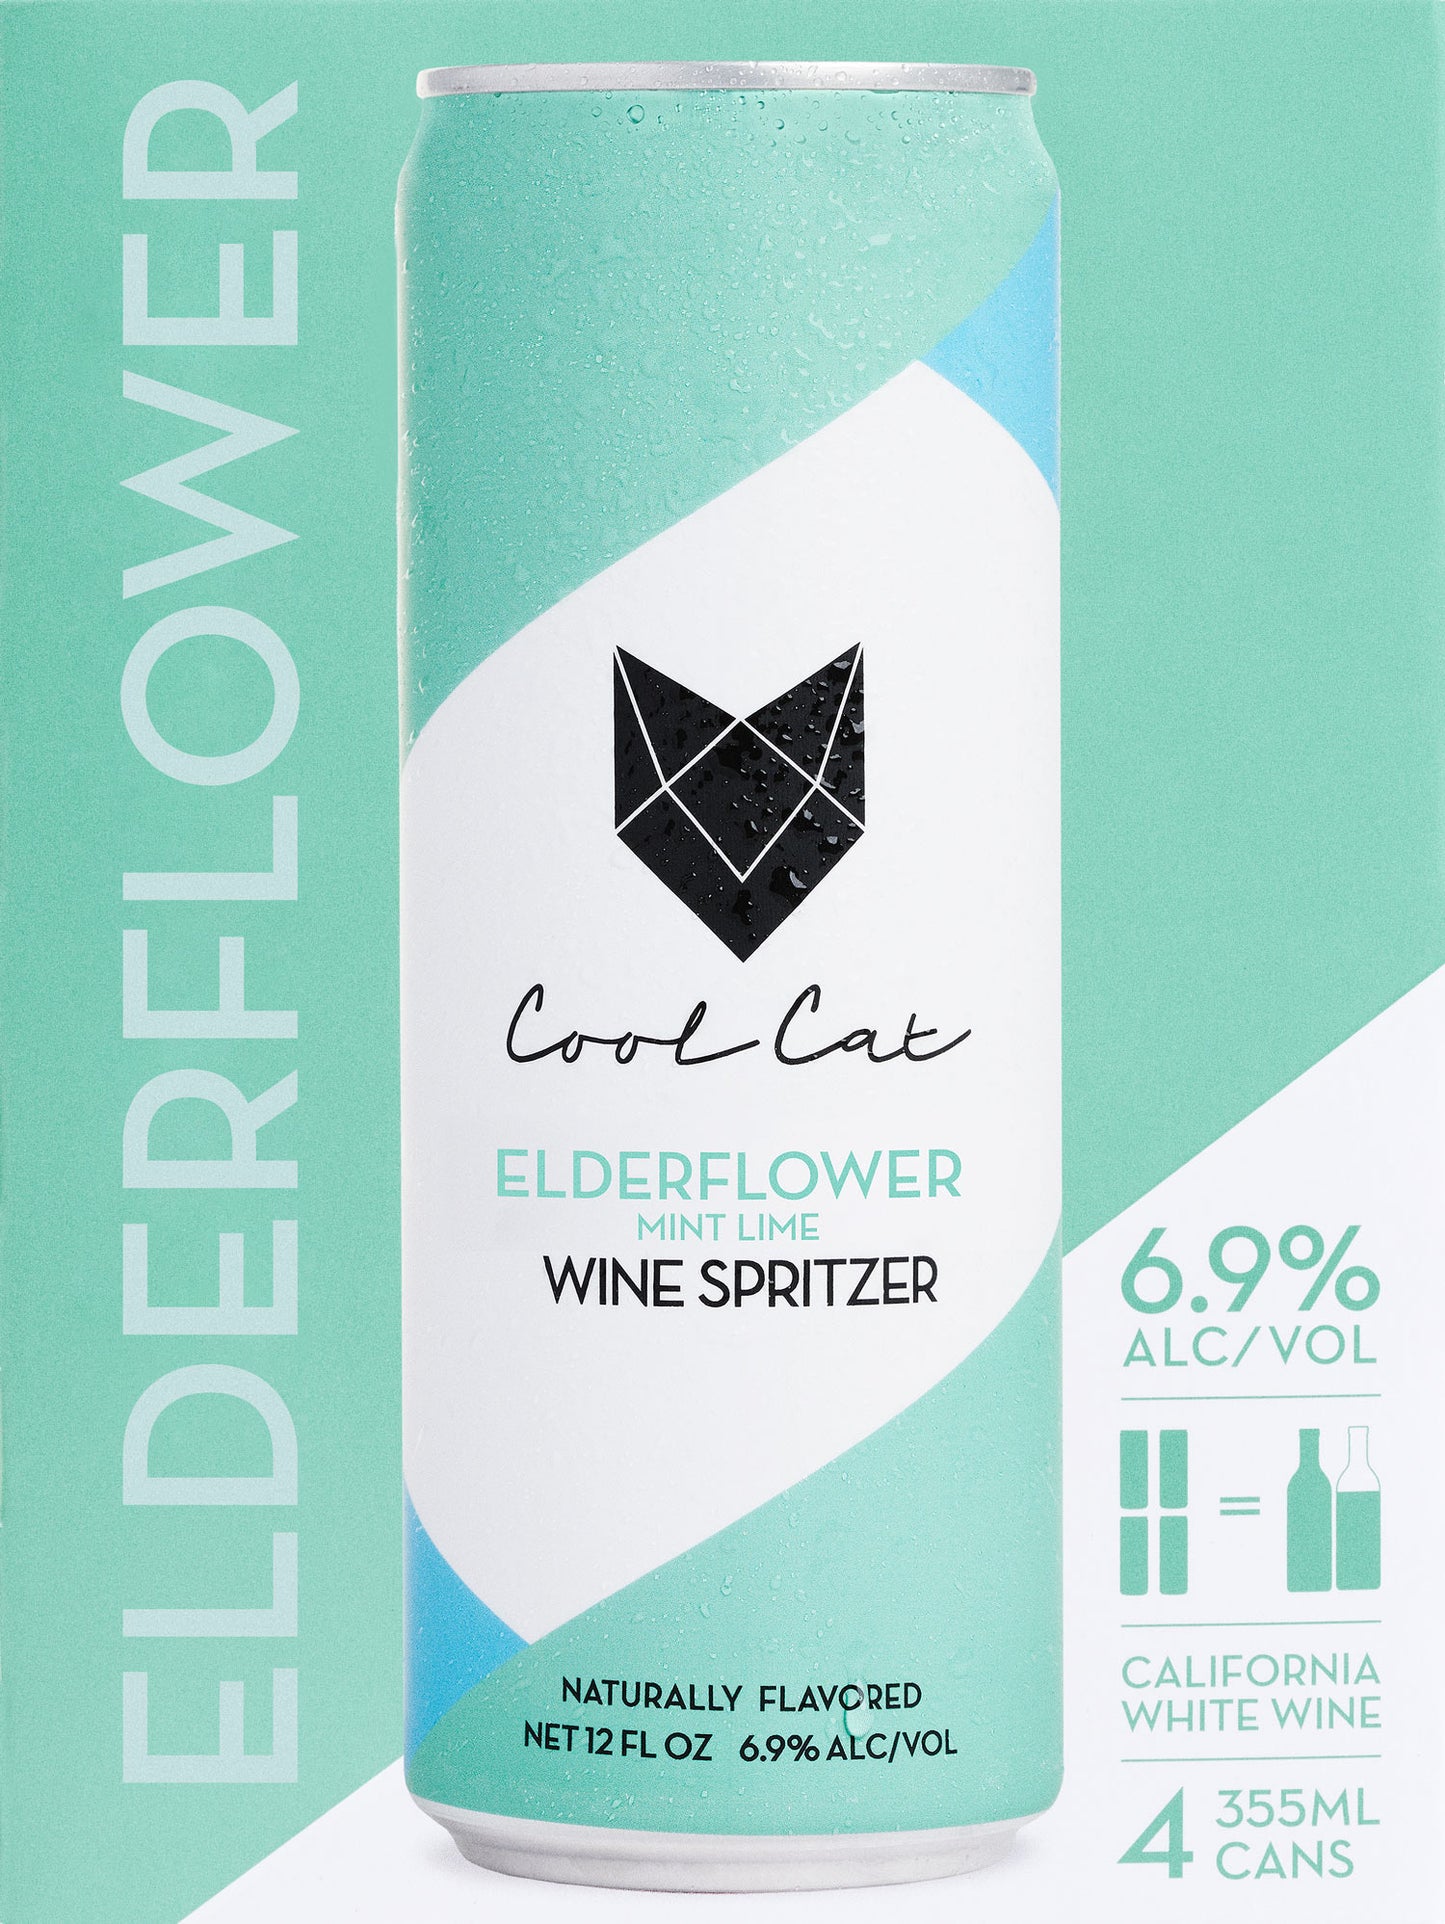 Product photo of the Cool Cat Elderflower Mint Lime Wine Spritzer.